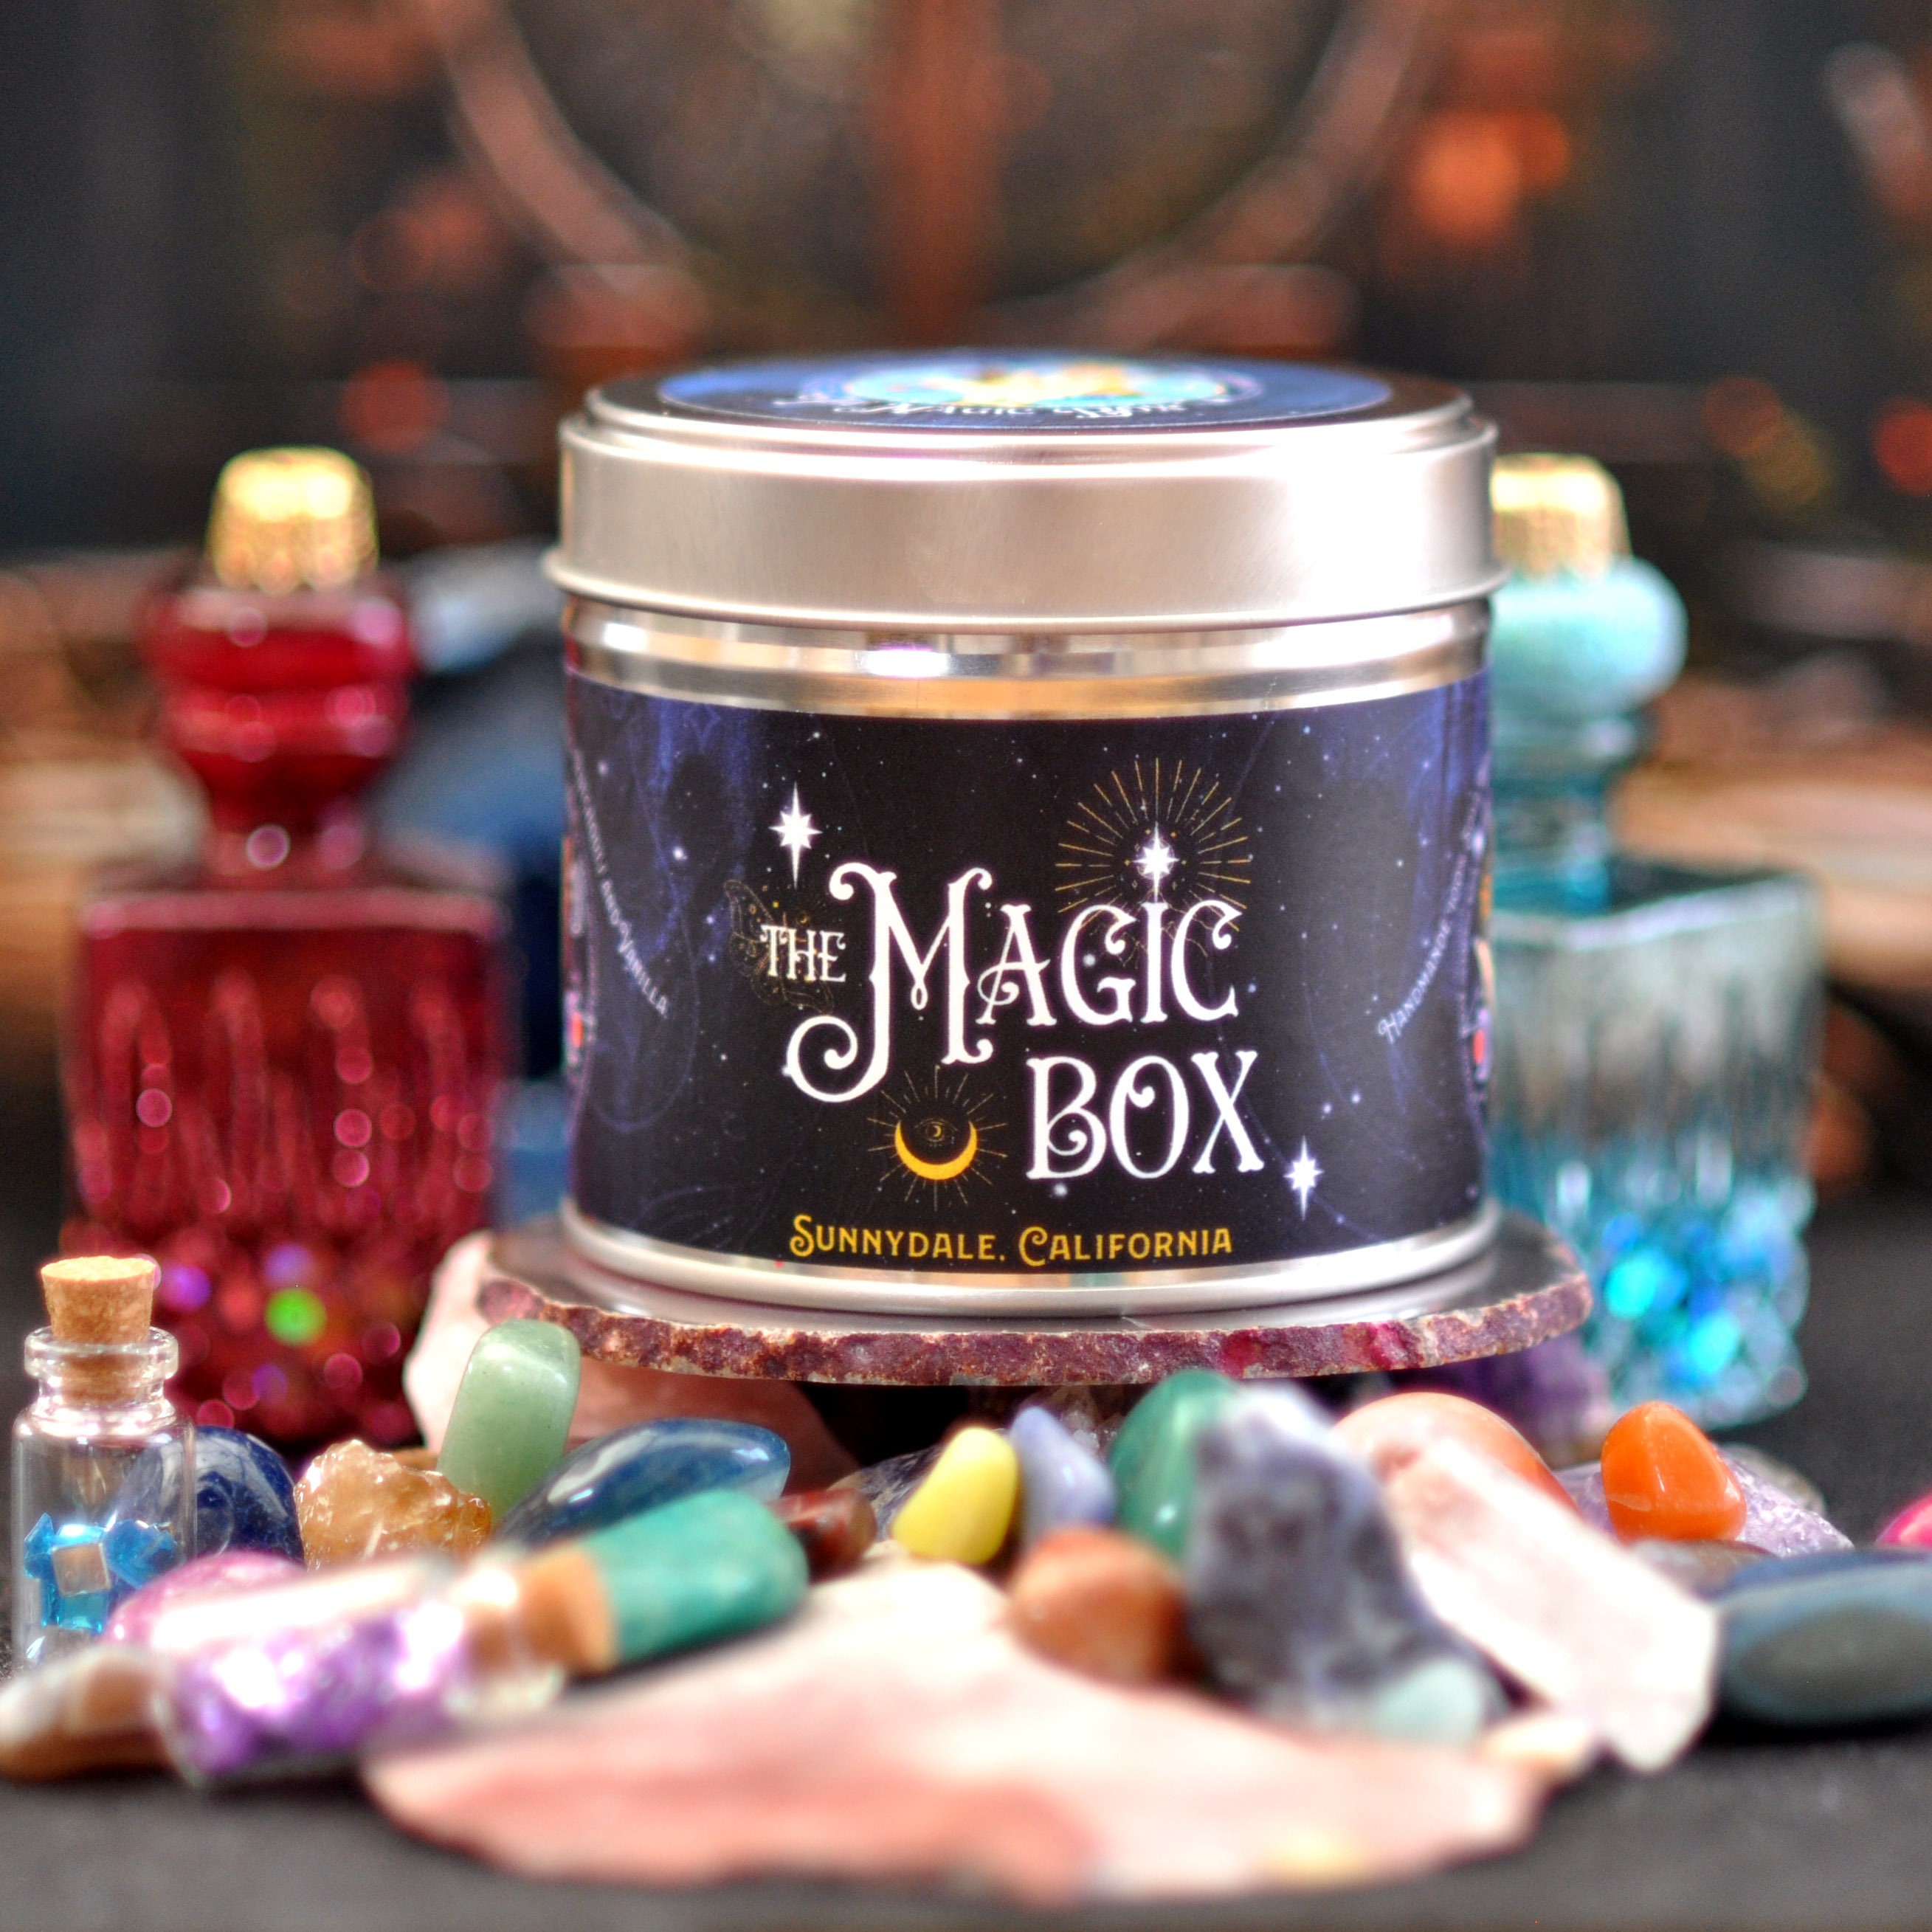 CANDLE POT Potions Vampire Dracula Poisoned Bloody Gothic Home Decor  Candles Halloween Magic Decor Witchy Core Special Cristal Pot Gift 